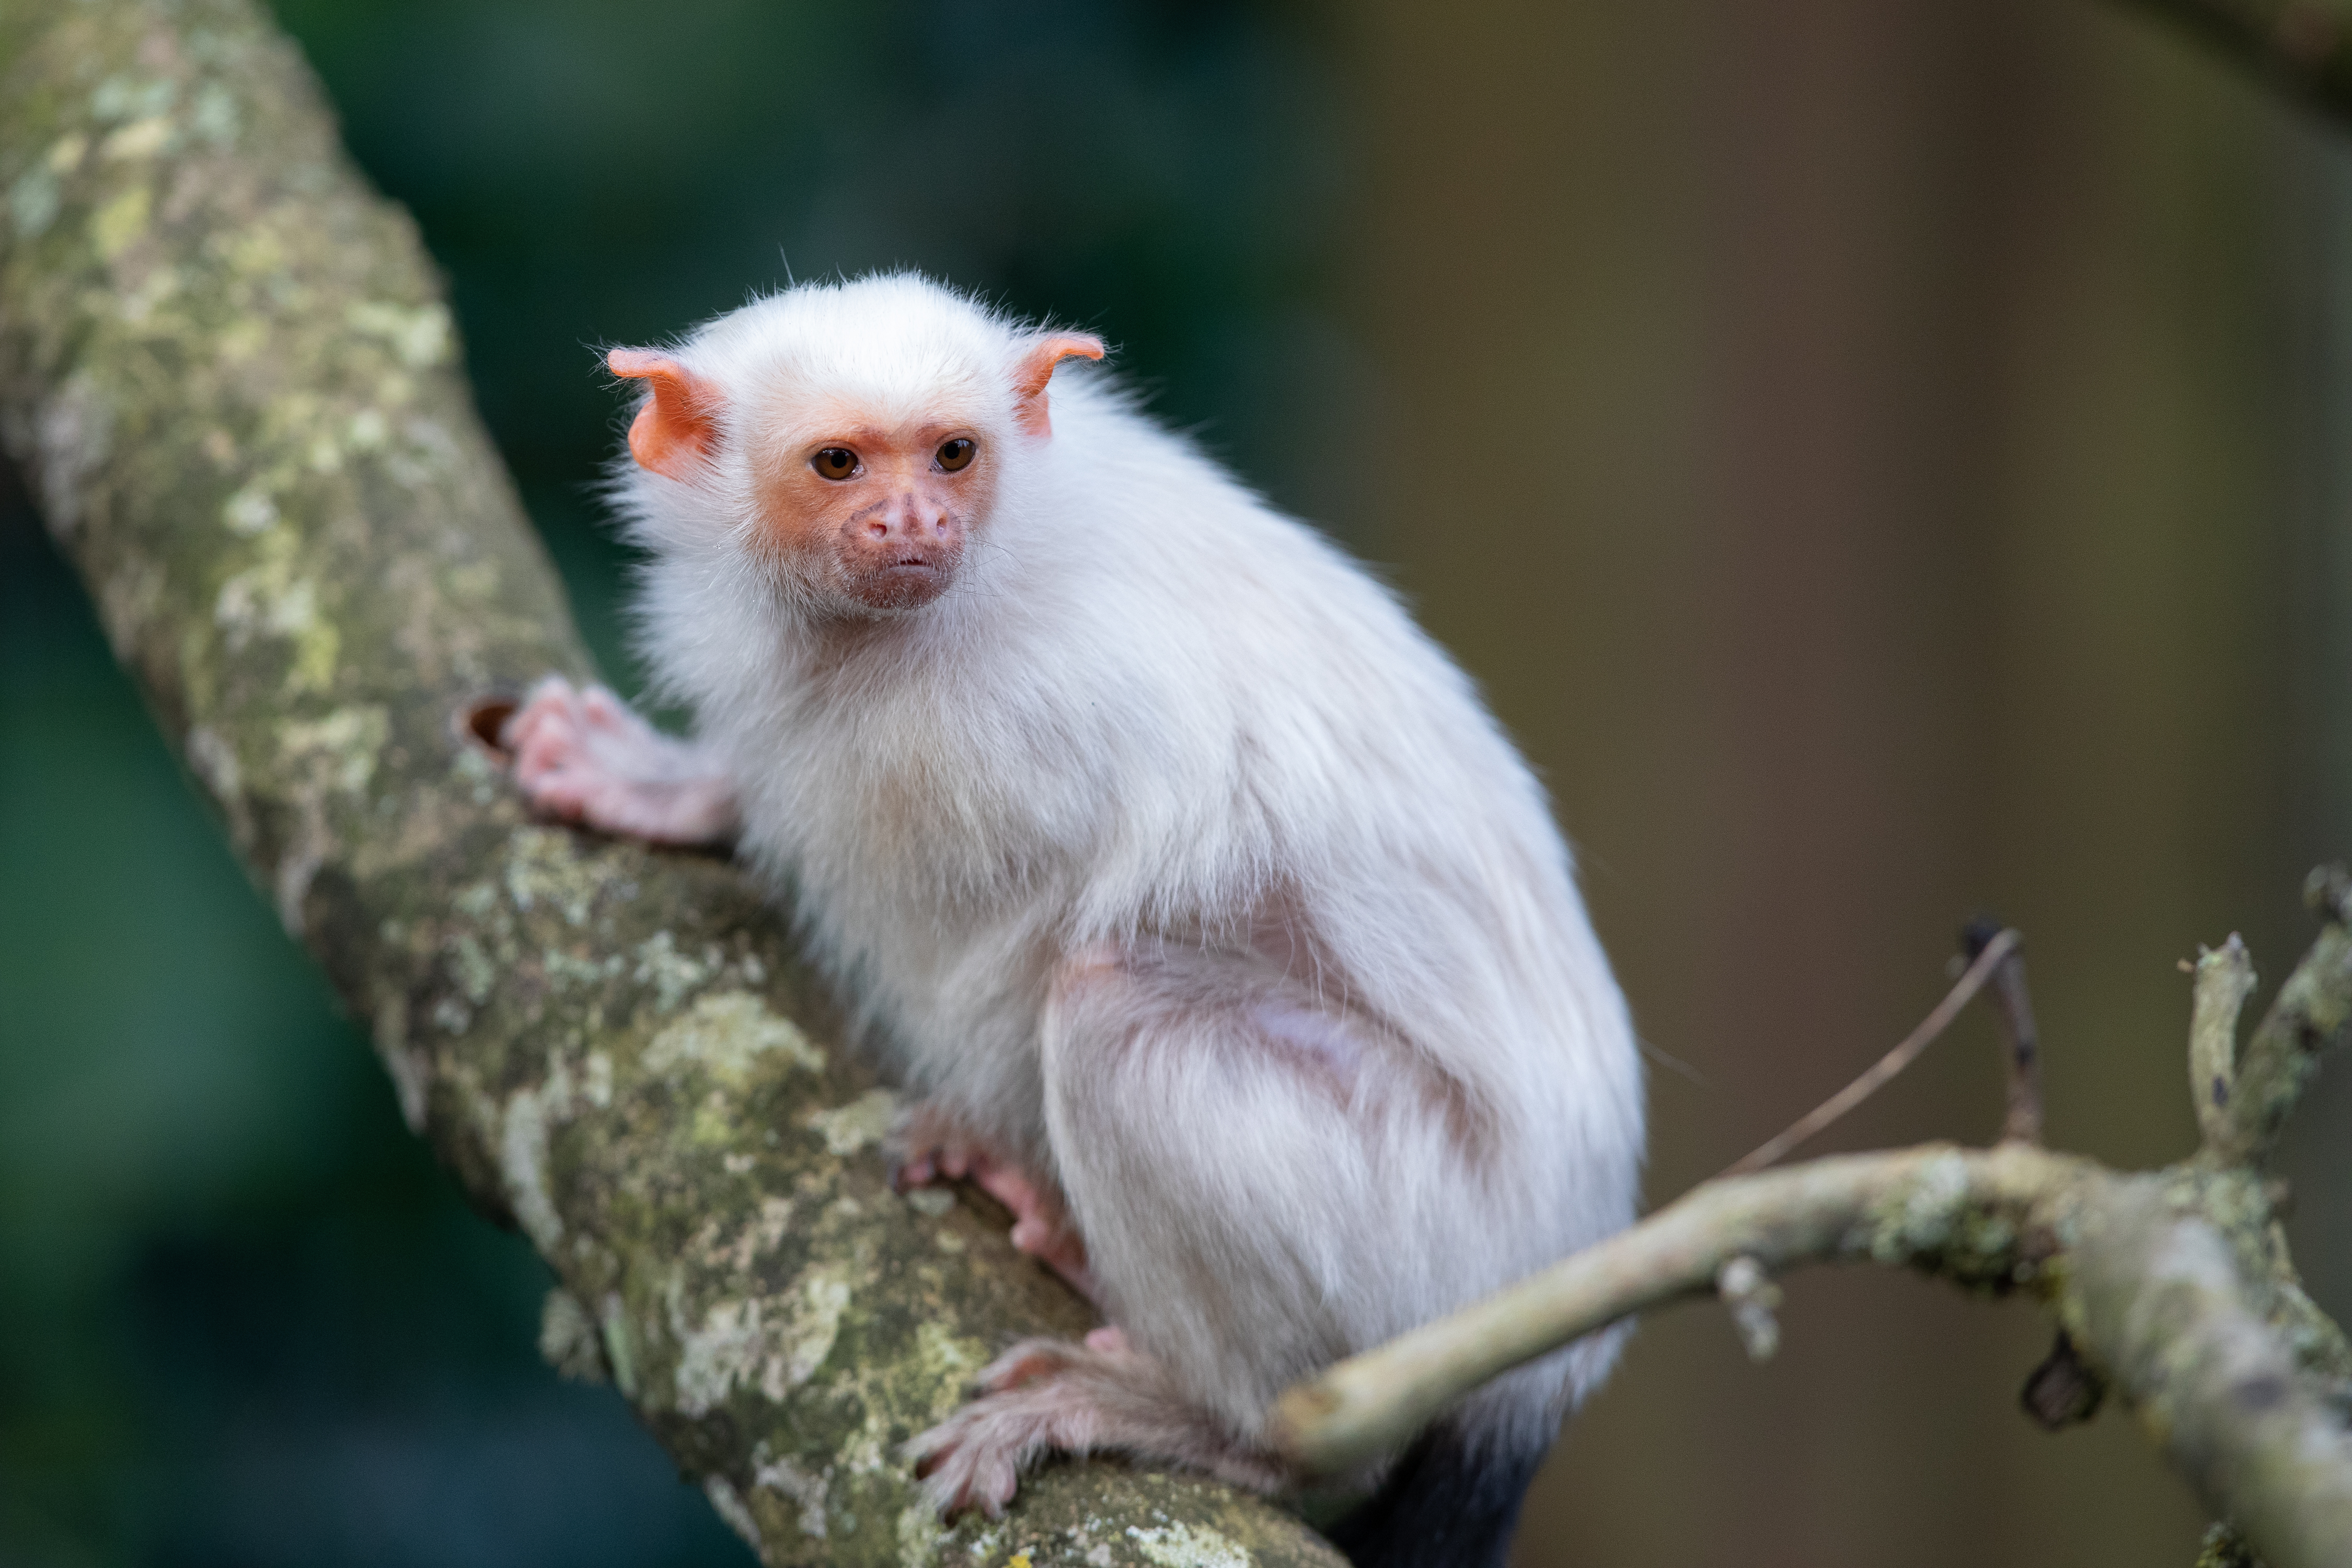 A silvery marmoset on a tree branch